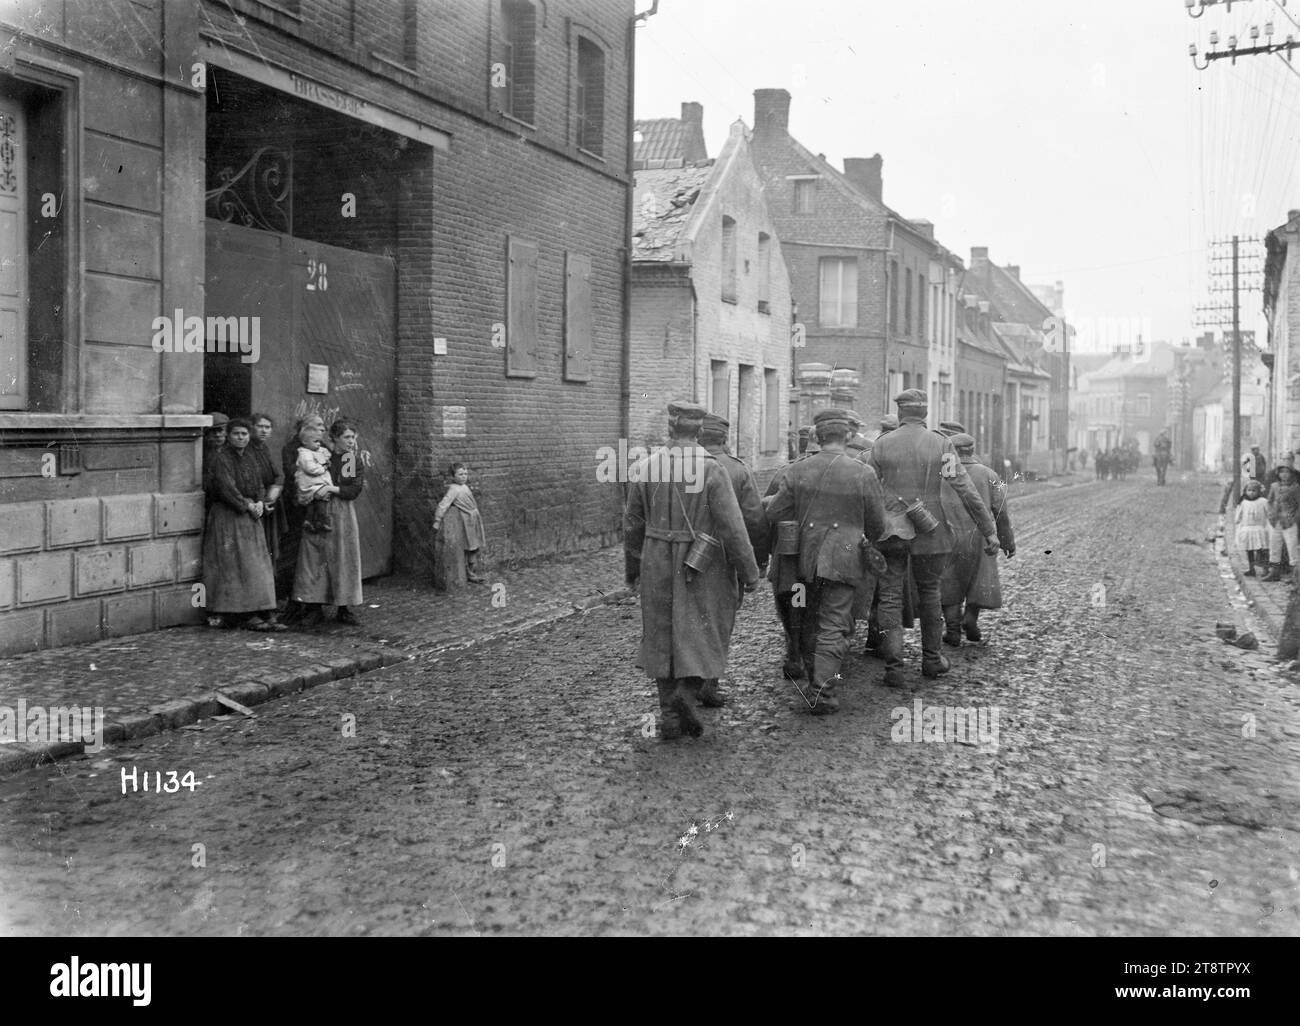 German World War I prisoners passing local inhabitants, Solesmes, France, A group of German prisoners of war walking down a street in the French town of Solesmes near the end of World War I. They are watched by a group of local inhabitants including a woman holding a baby. Photograph taken 1 November 1918 Stock Photo